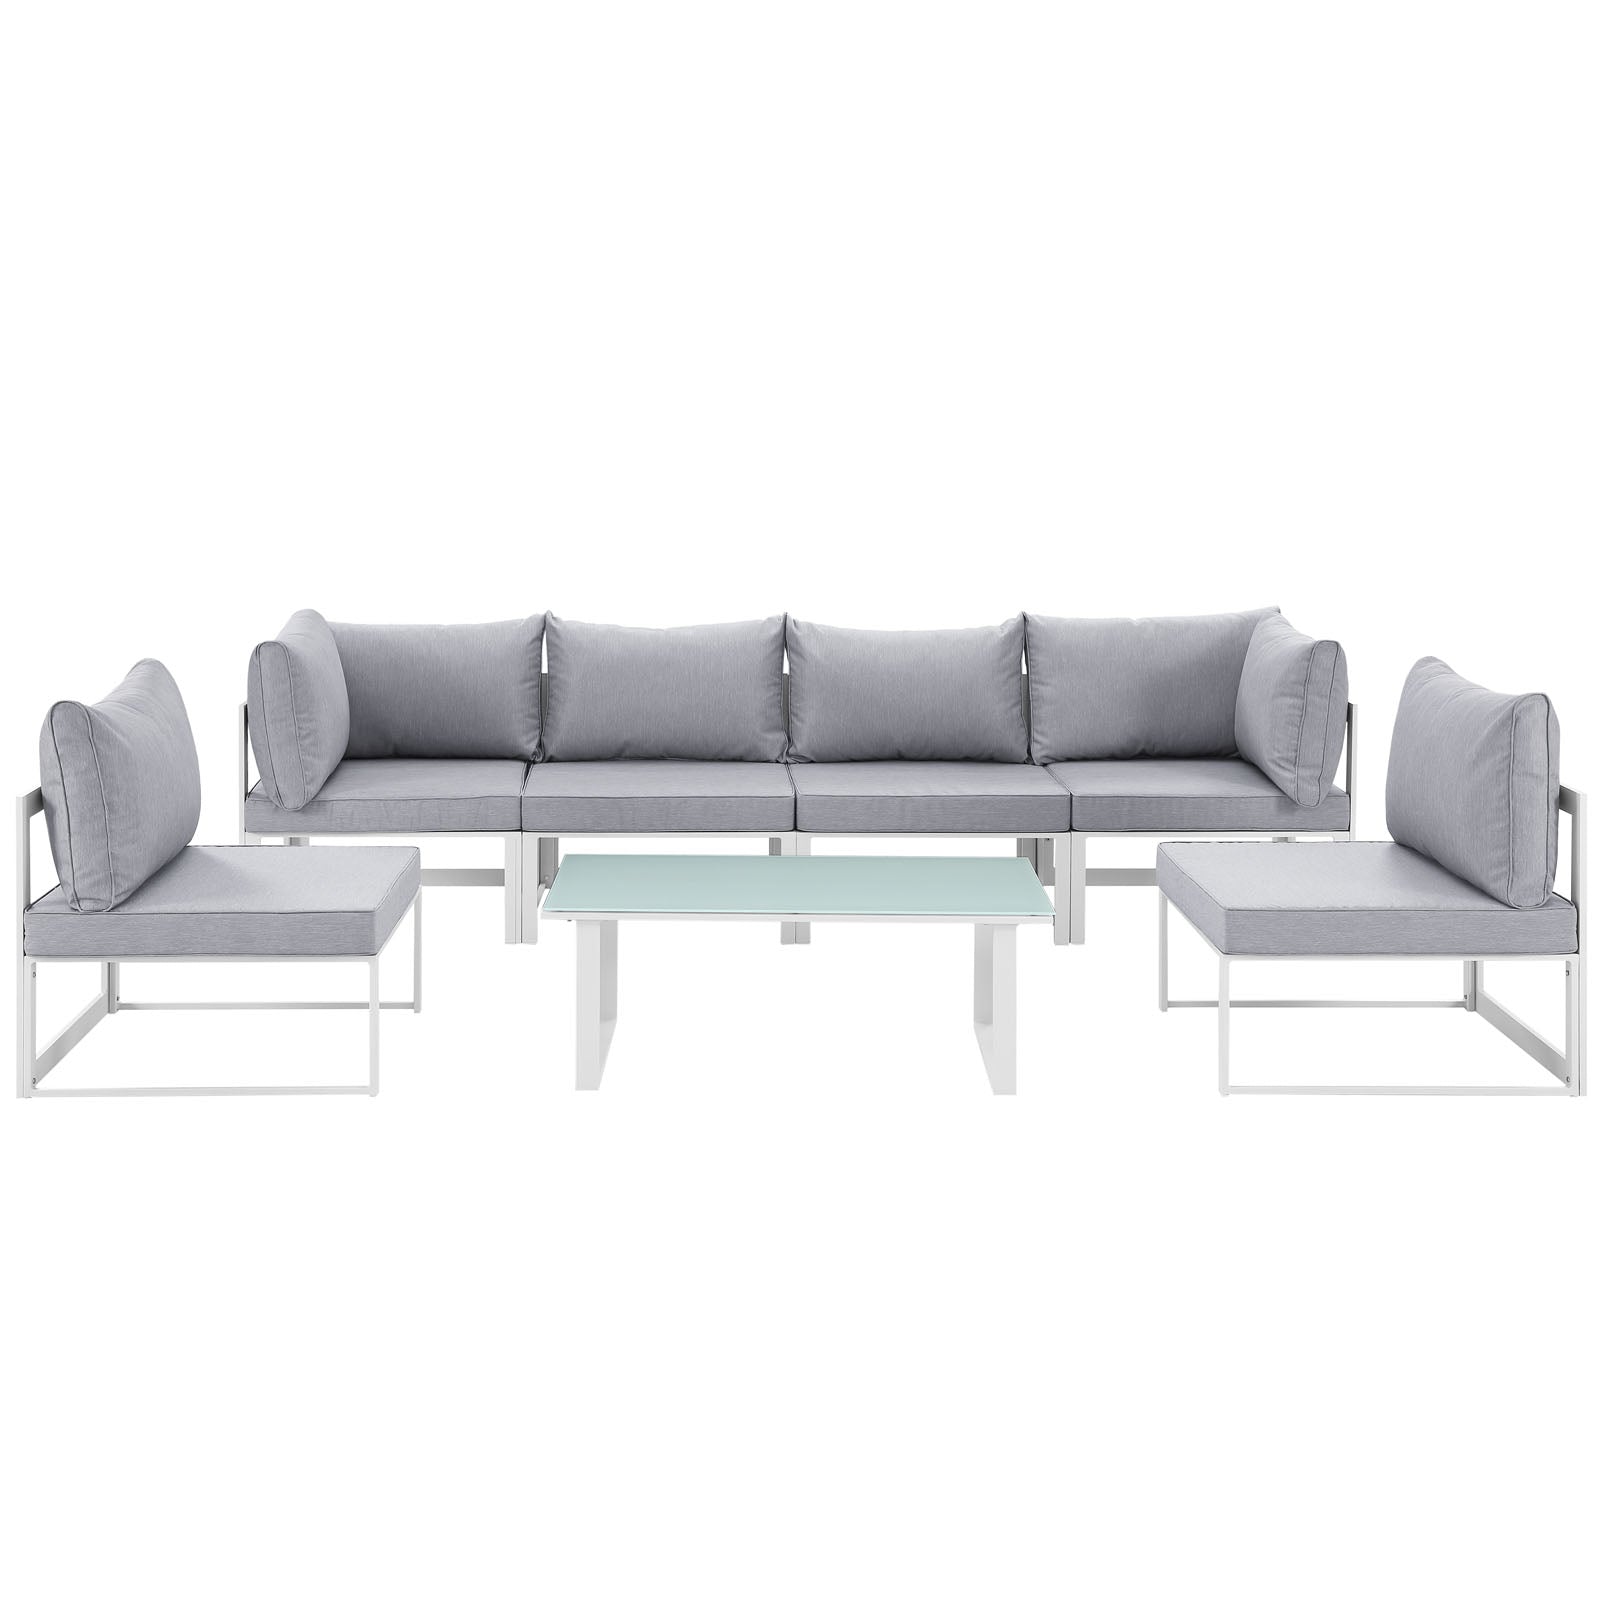 Modway Outdoor Conversation Sets - Fortuna 7 Piece Outdoor 60"D Patio Sectional Sofa Set White Gray